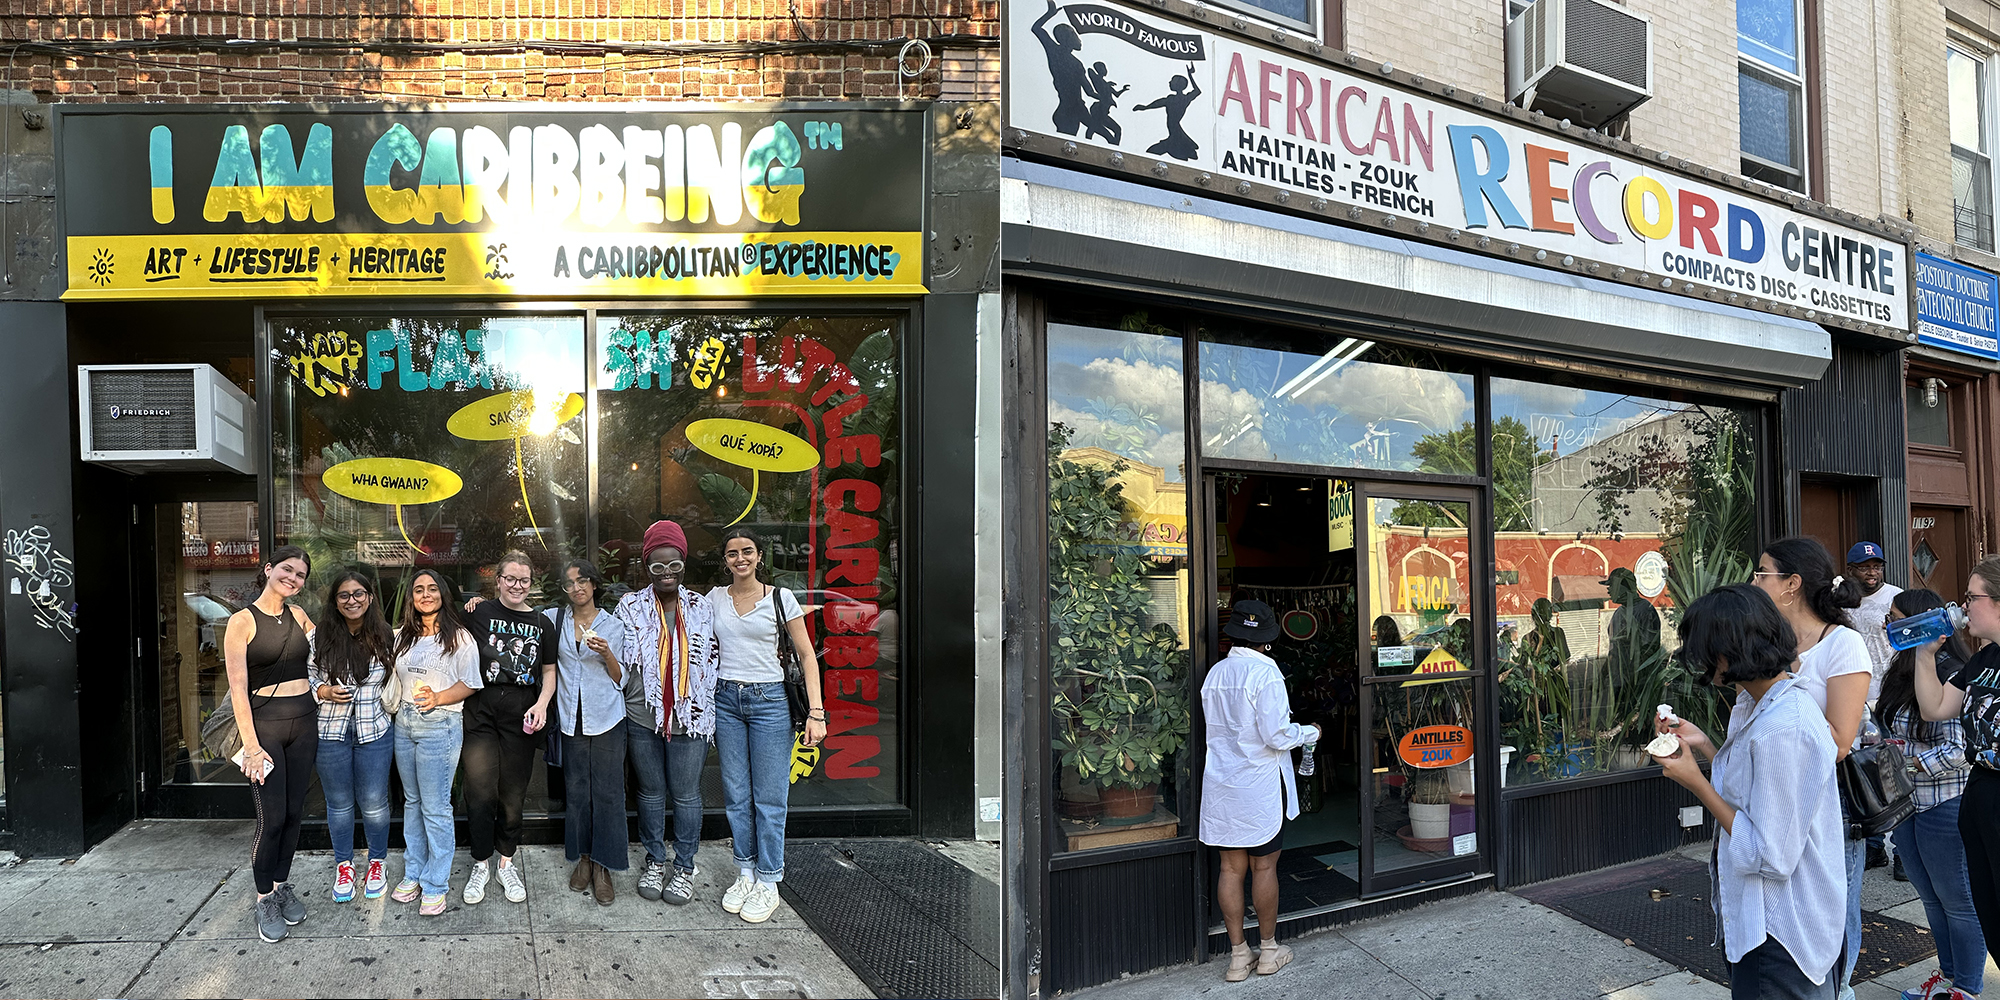 Historic Preservation students with Dr. Sophonie Milande Joseph, adjunct associate professor in the Graduate Center for Planning and the Environment outside of I Am CaribBEING in Brooklyn (photo by Shelley Worrell); Joseph’s studio visits the African Record Centre (photo by Dr. Sophonie Joseph).